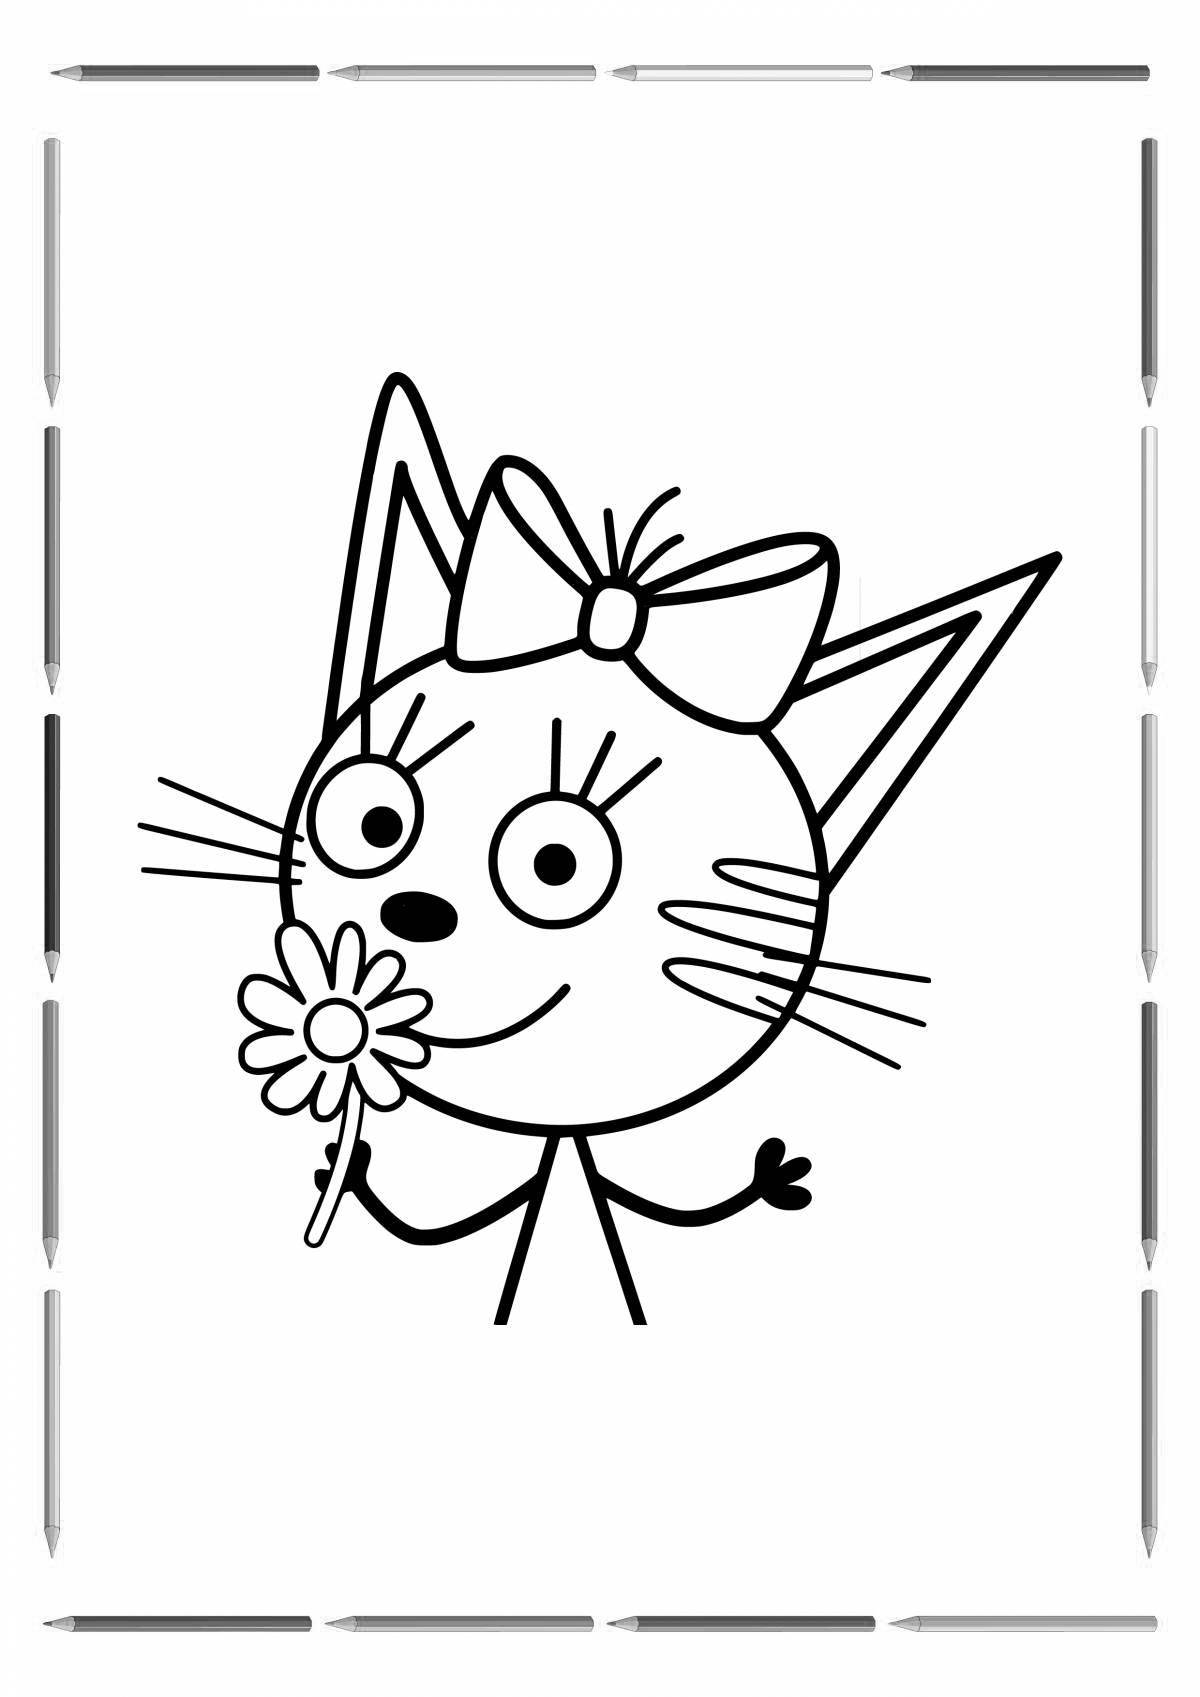 Sparkling coloring three cats for girls 3 years old